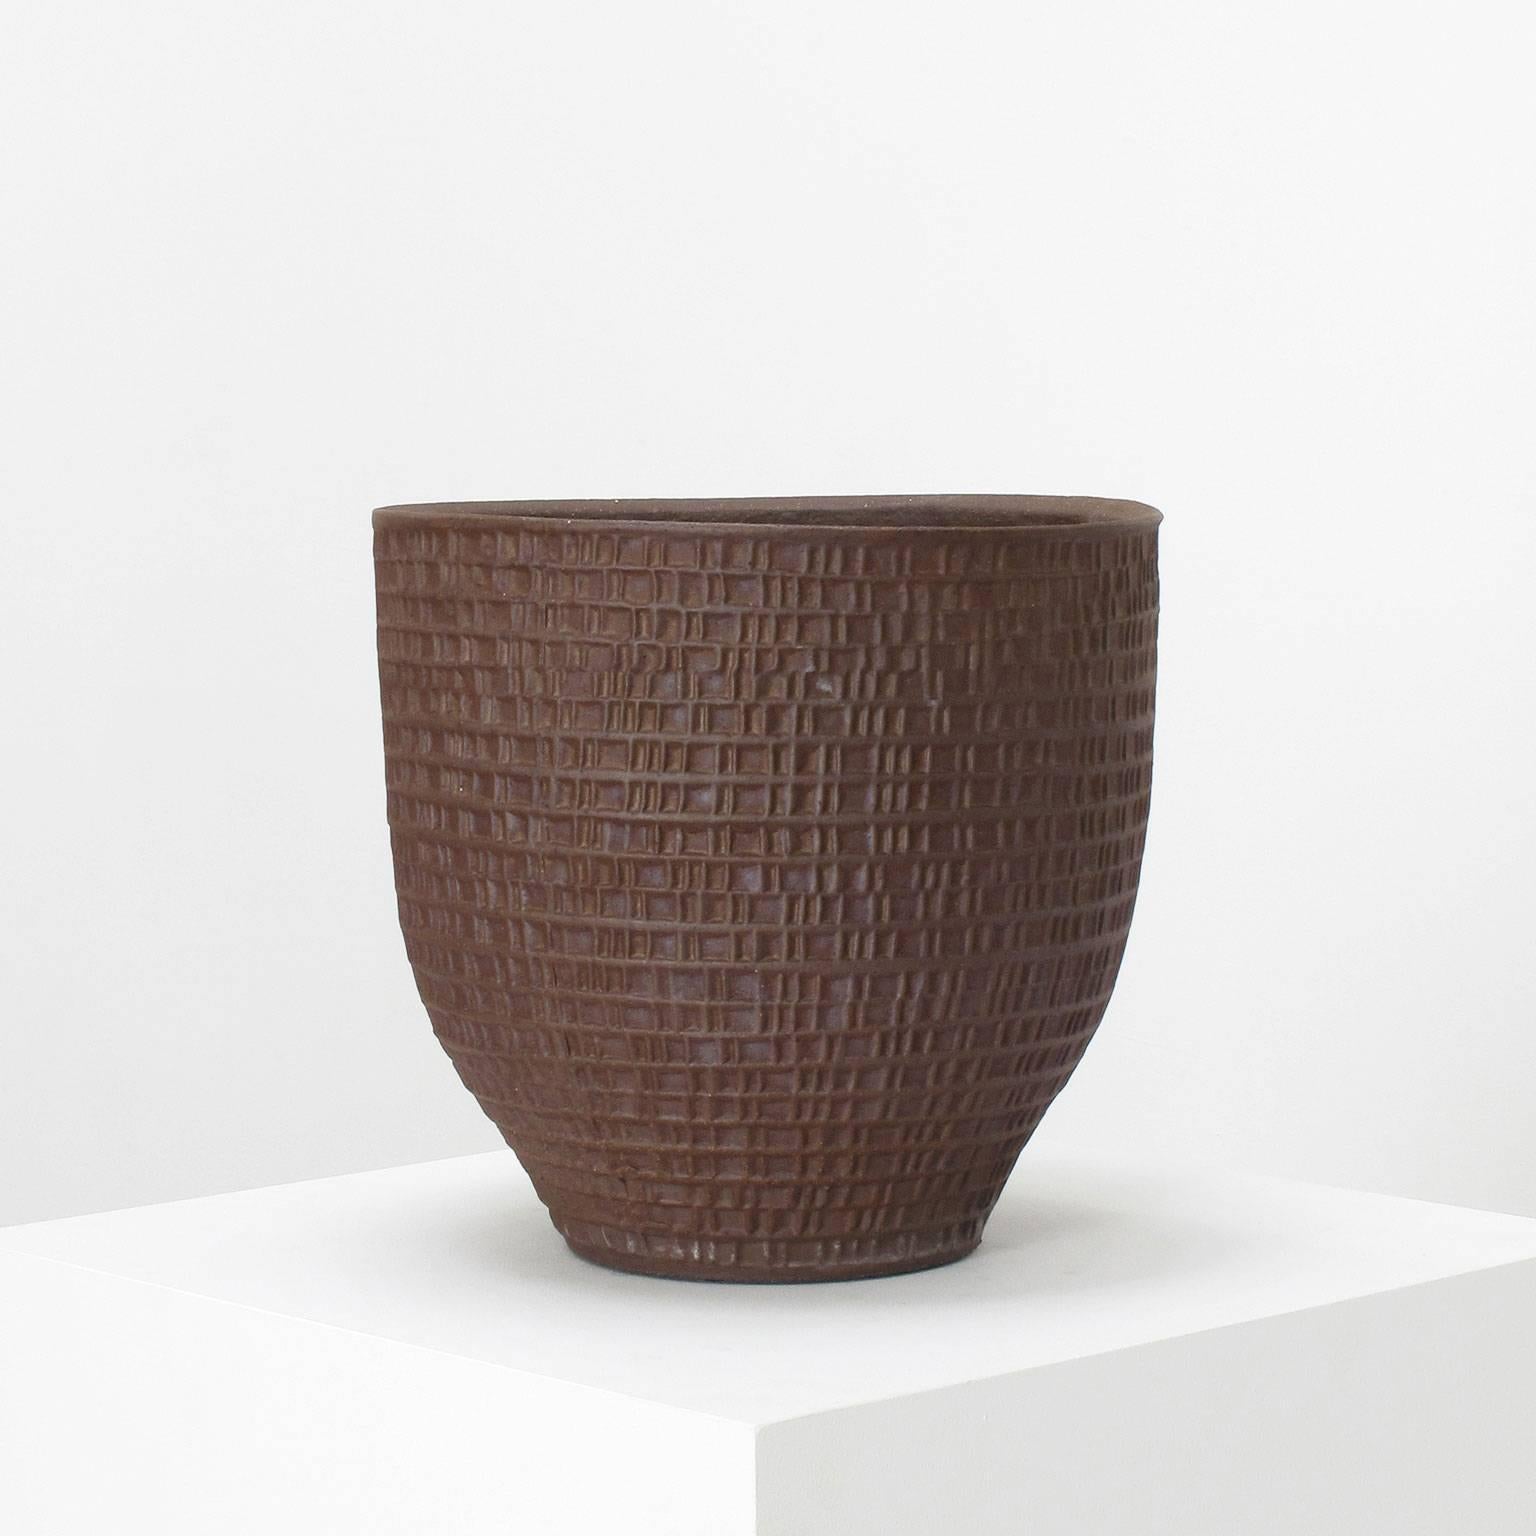 David Cressey 'rectangle' design, stoneware, glazed, 1960s, Pro Artisan Collection, Architectural Pottery, Los Angeles, California, 12.25 high x 13.25 diameter inches (31 high x 33.7 diameter cm), 16.5 pounds.